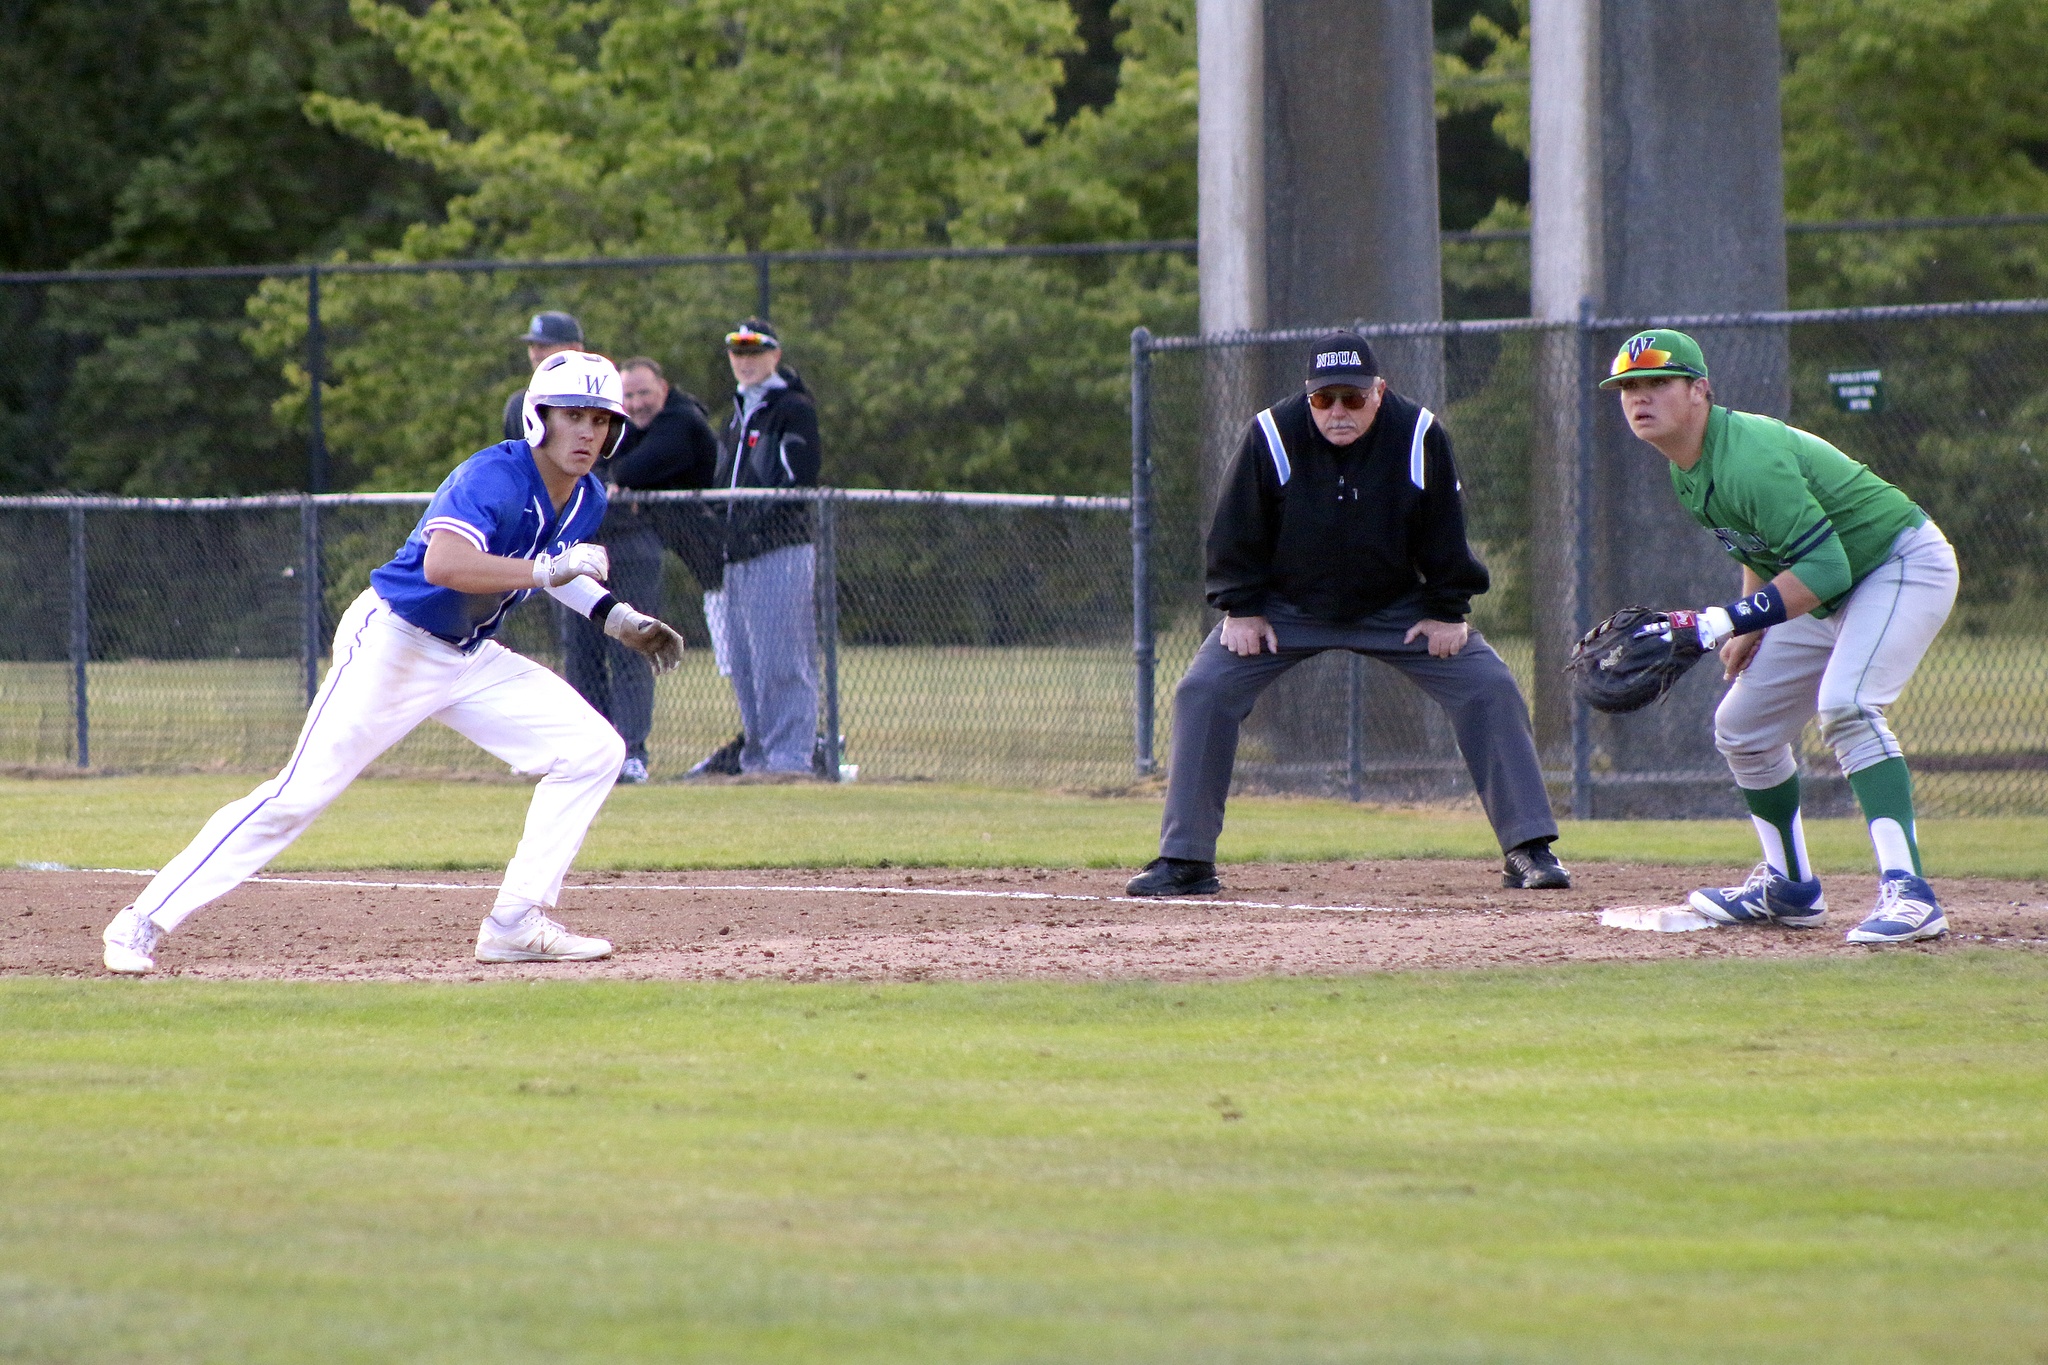 Federal Way's Ben Koler heads back to first base during a pick-off attempt in the first inning of the May 22 state playoff game against Woodinville at Heidelberg Park in Tacoma. TERRENCE HILL